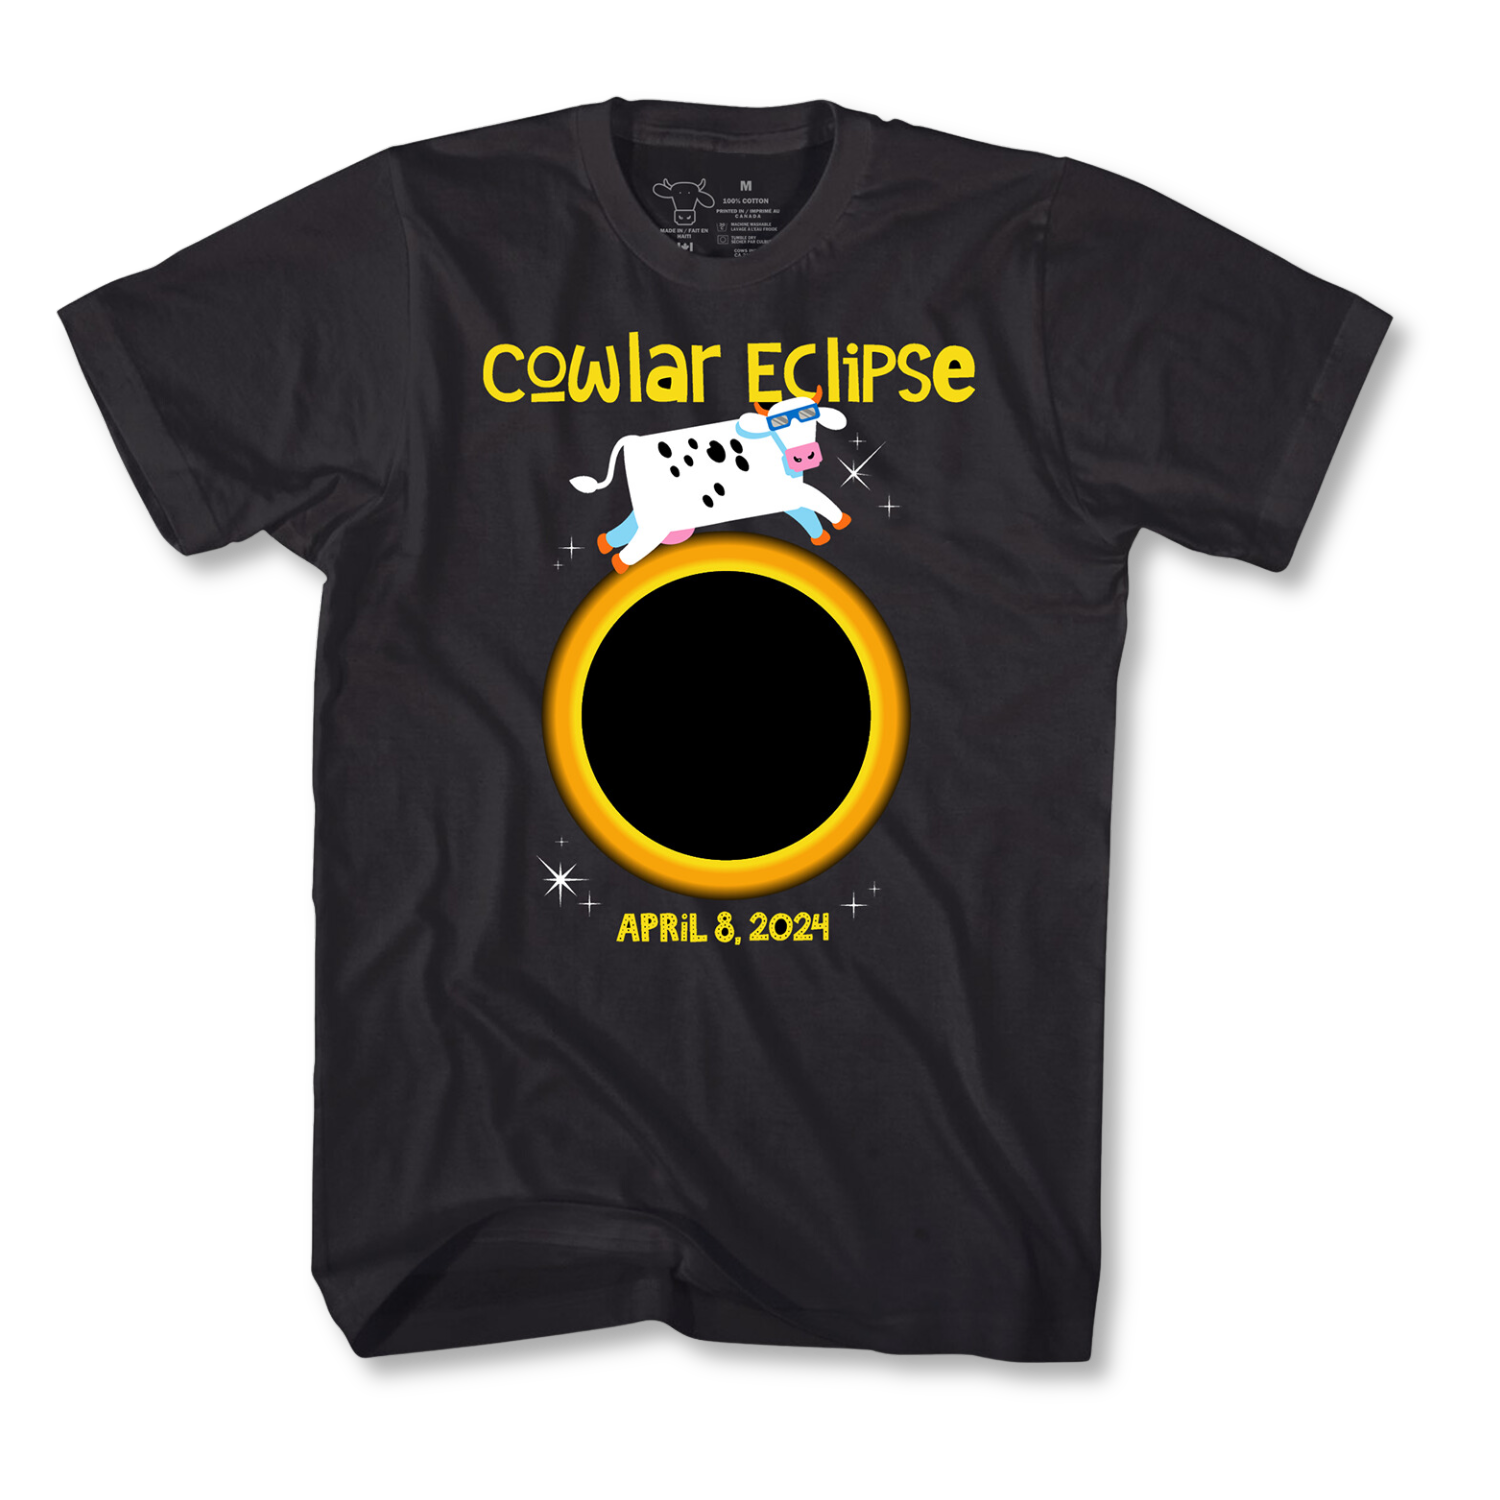 COWlar Eclipse Adult/Youth/Kids T